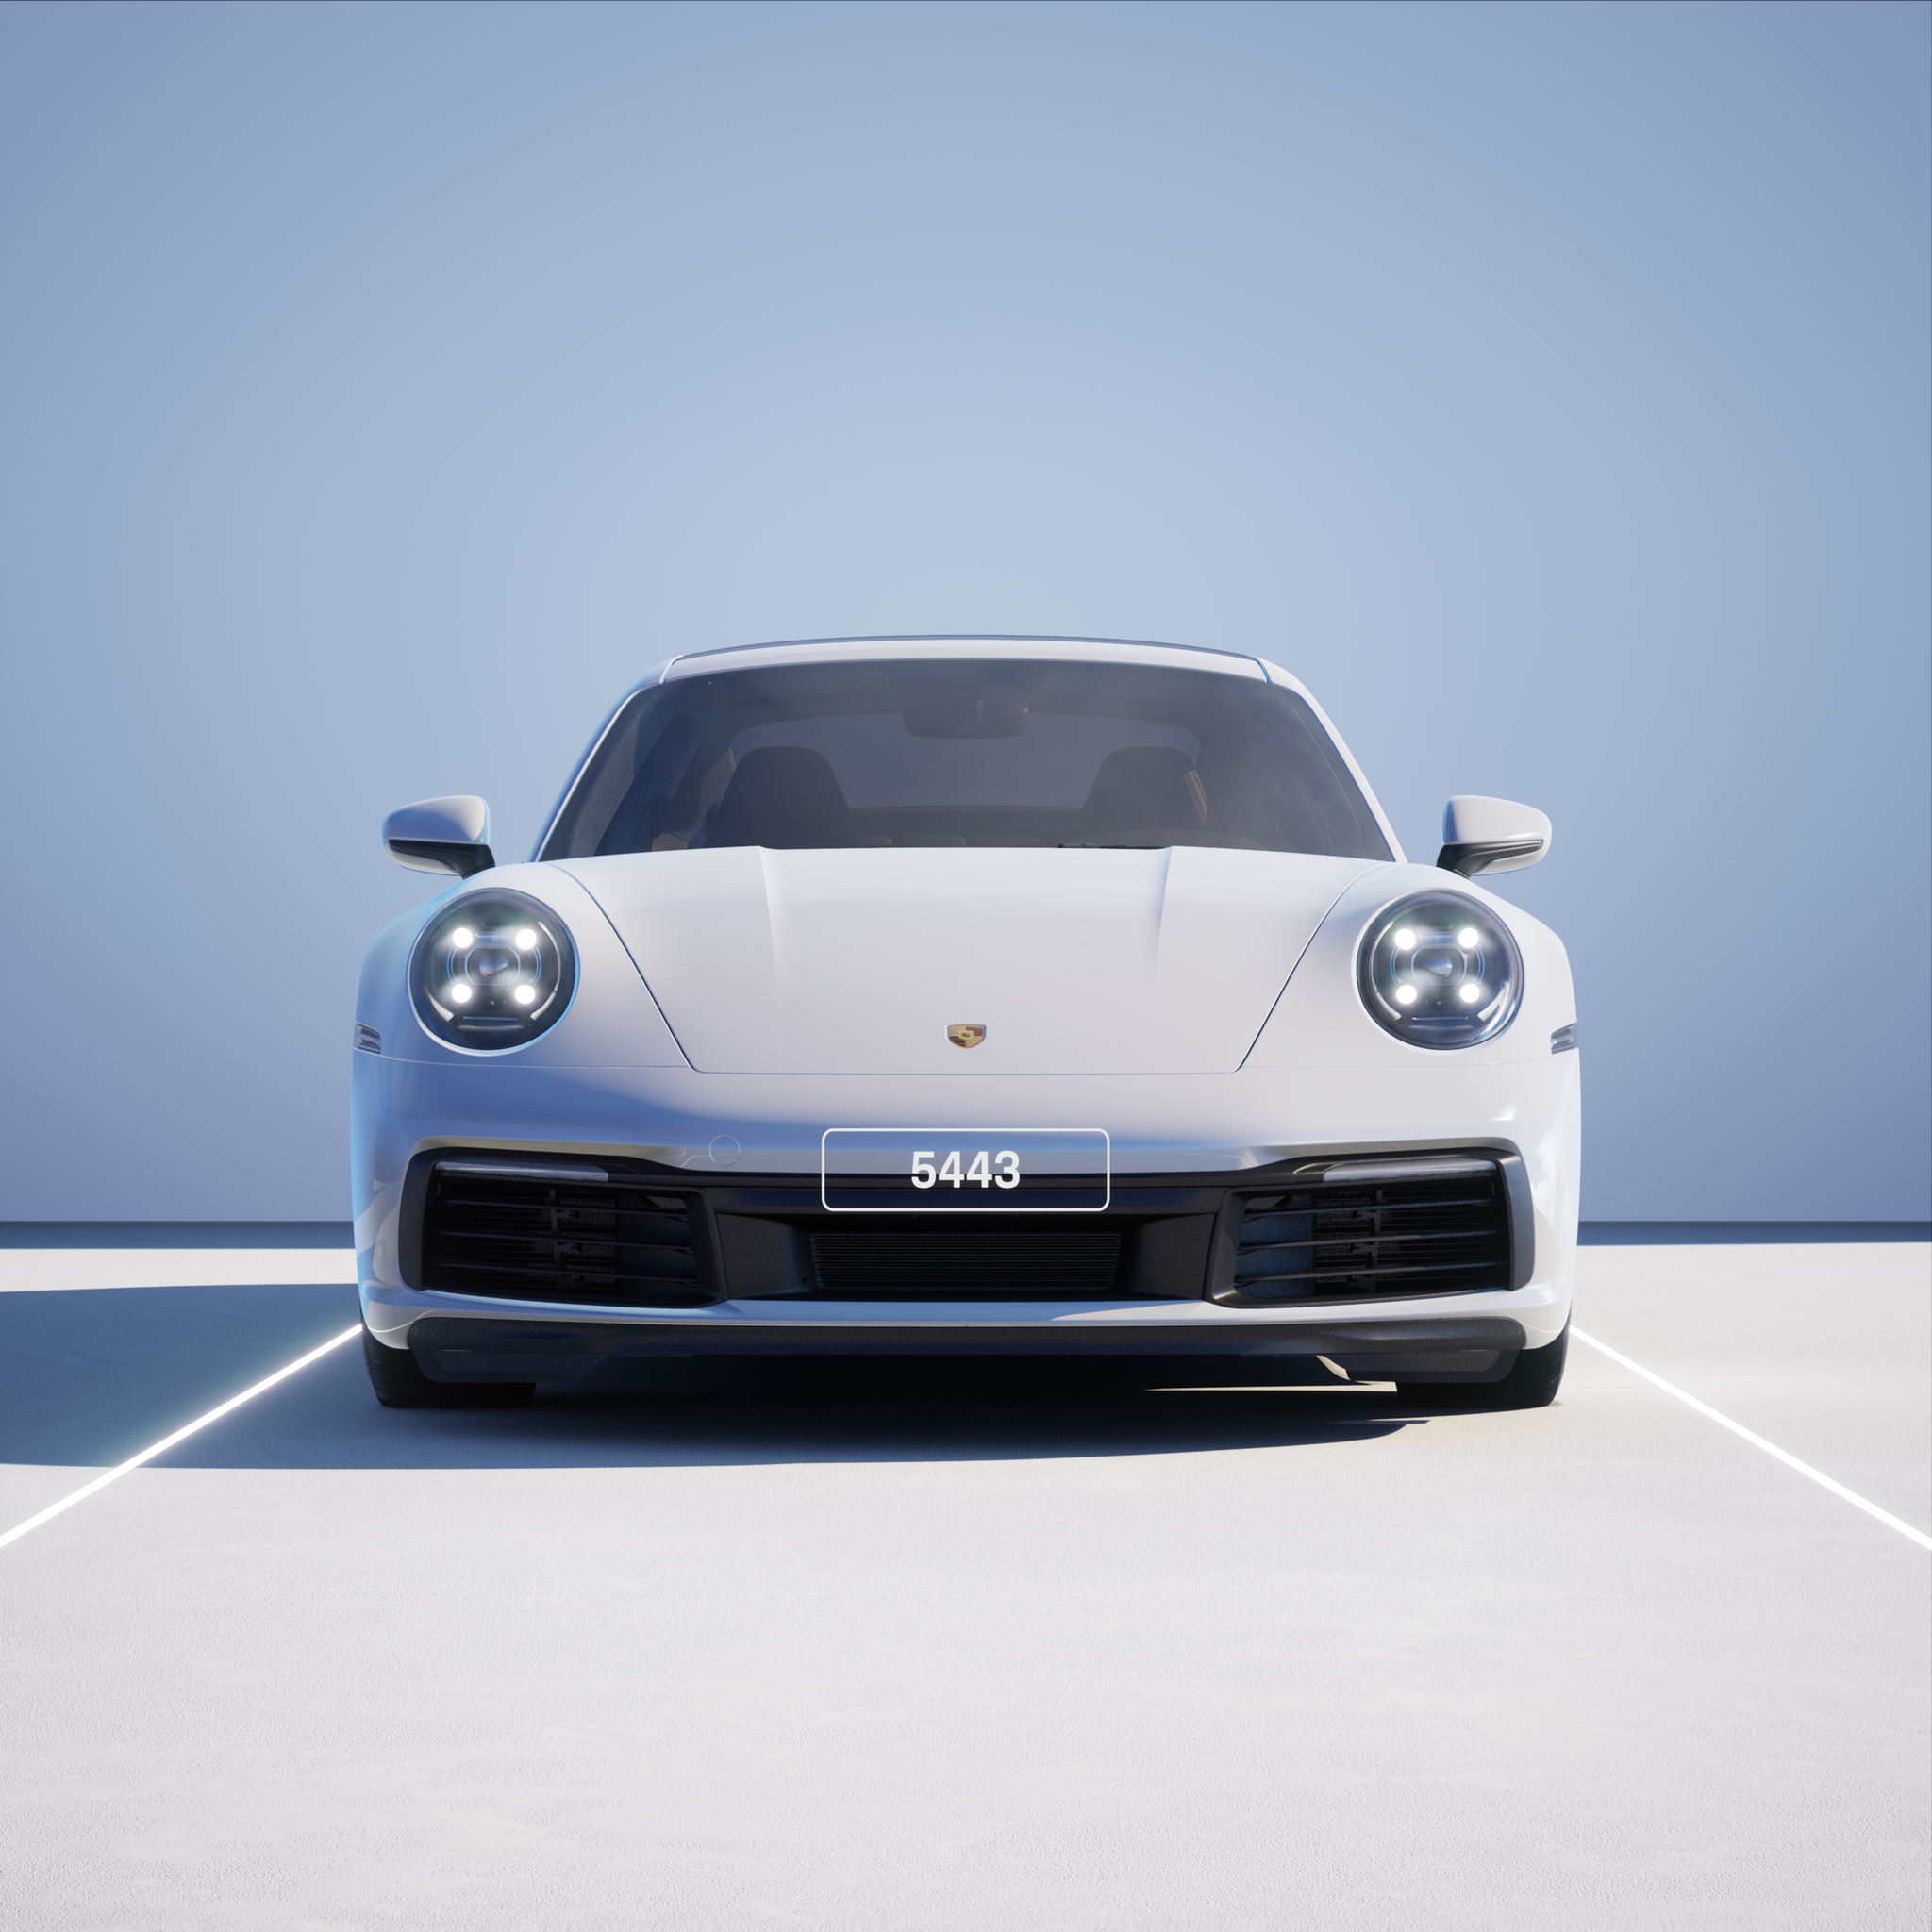 The PORSCHΞ 911 5443 image in phase